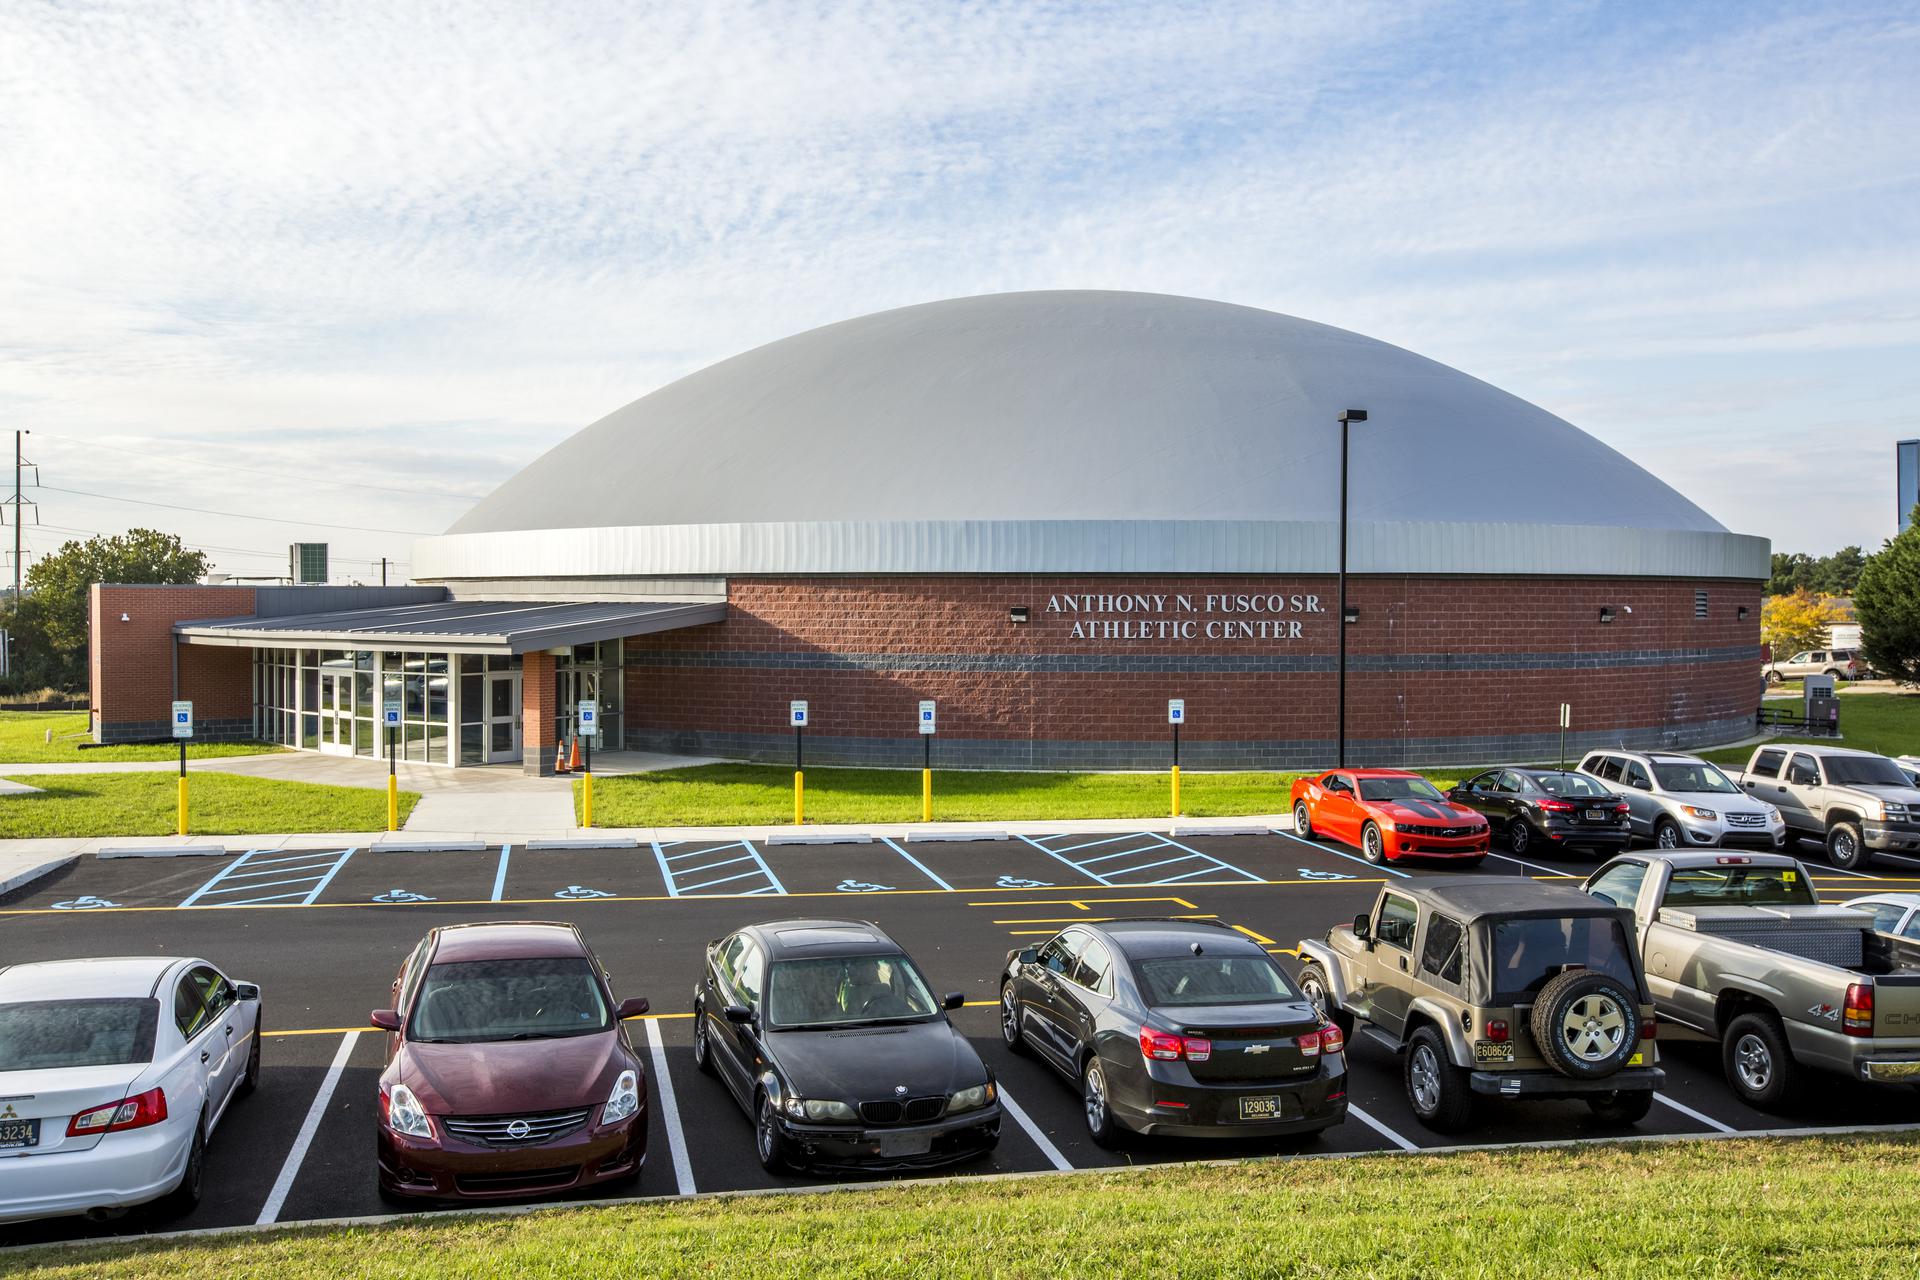 Anthony N. Fusco Sr. Athletic Center outside view